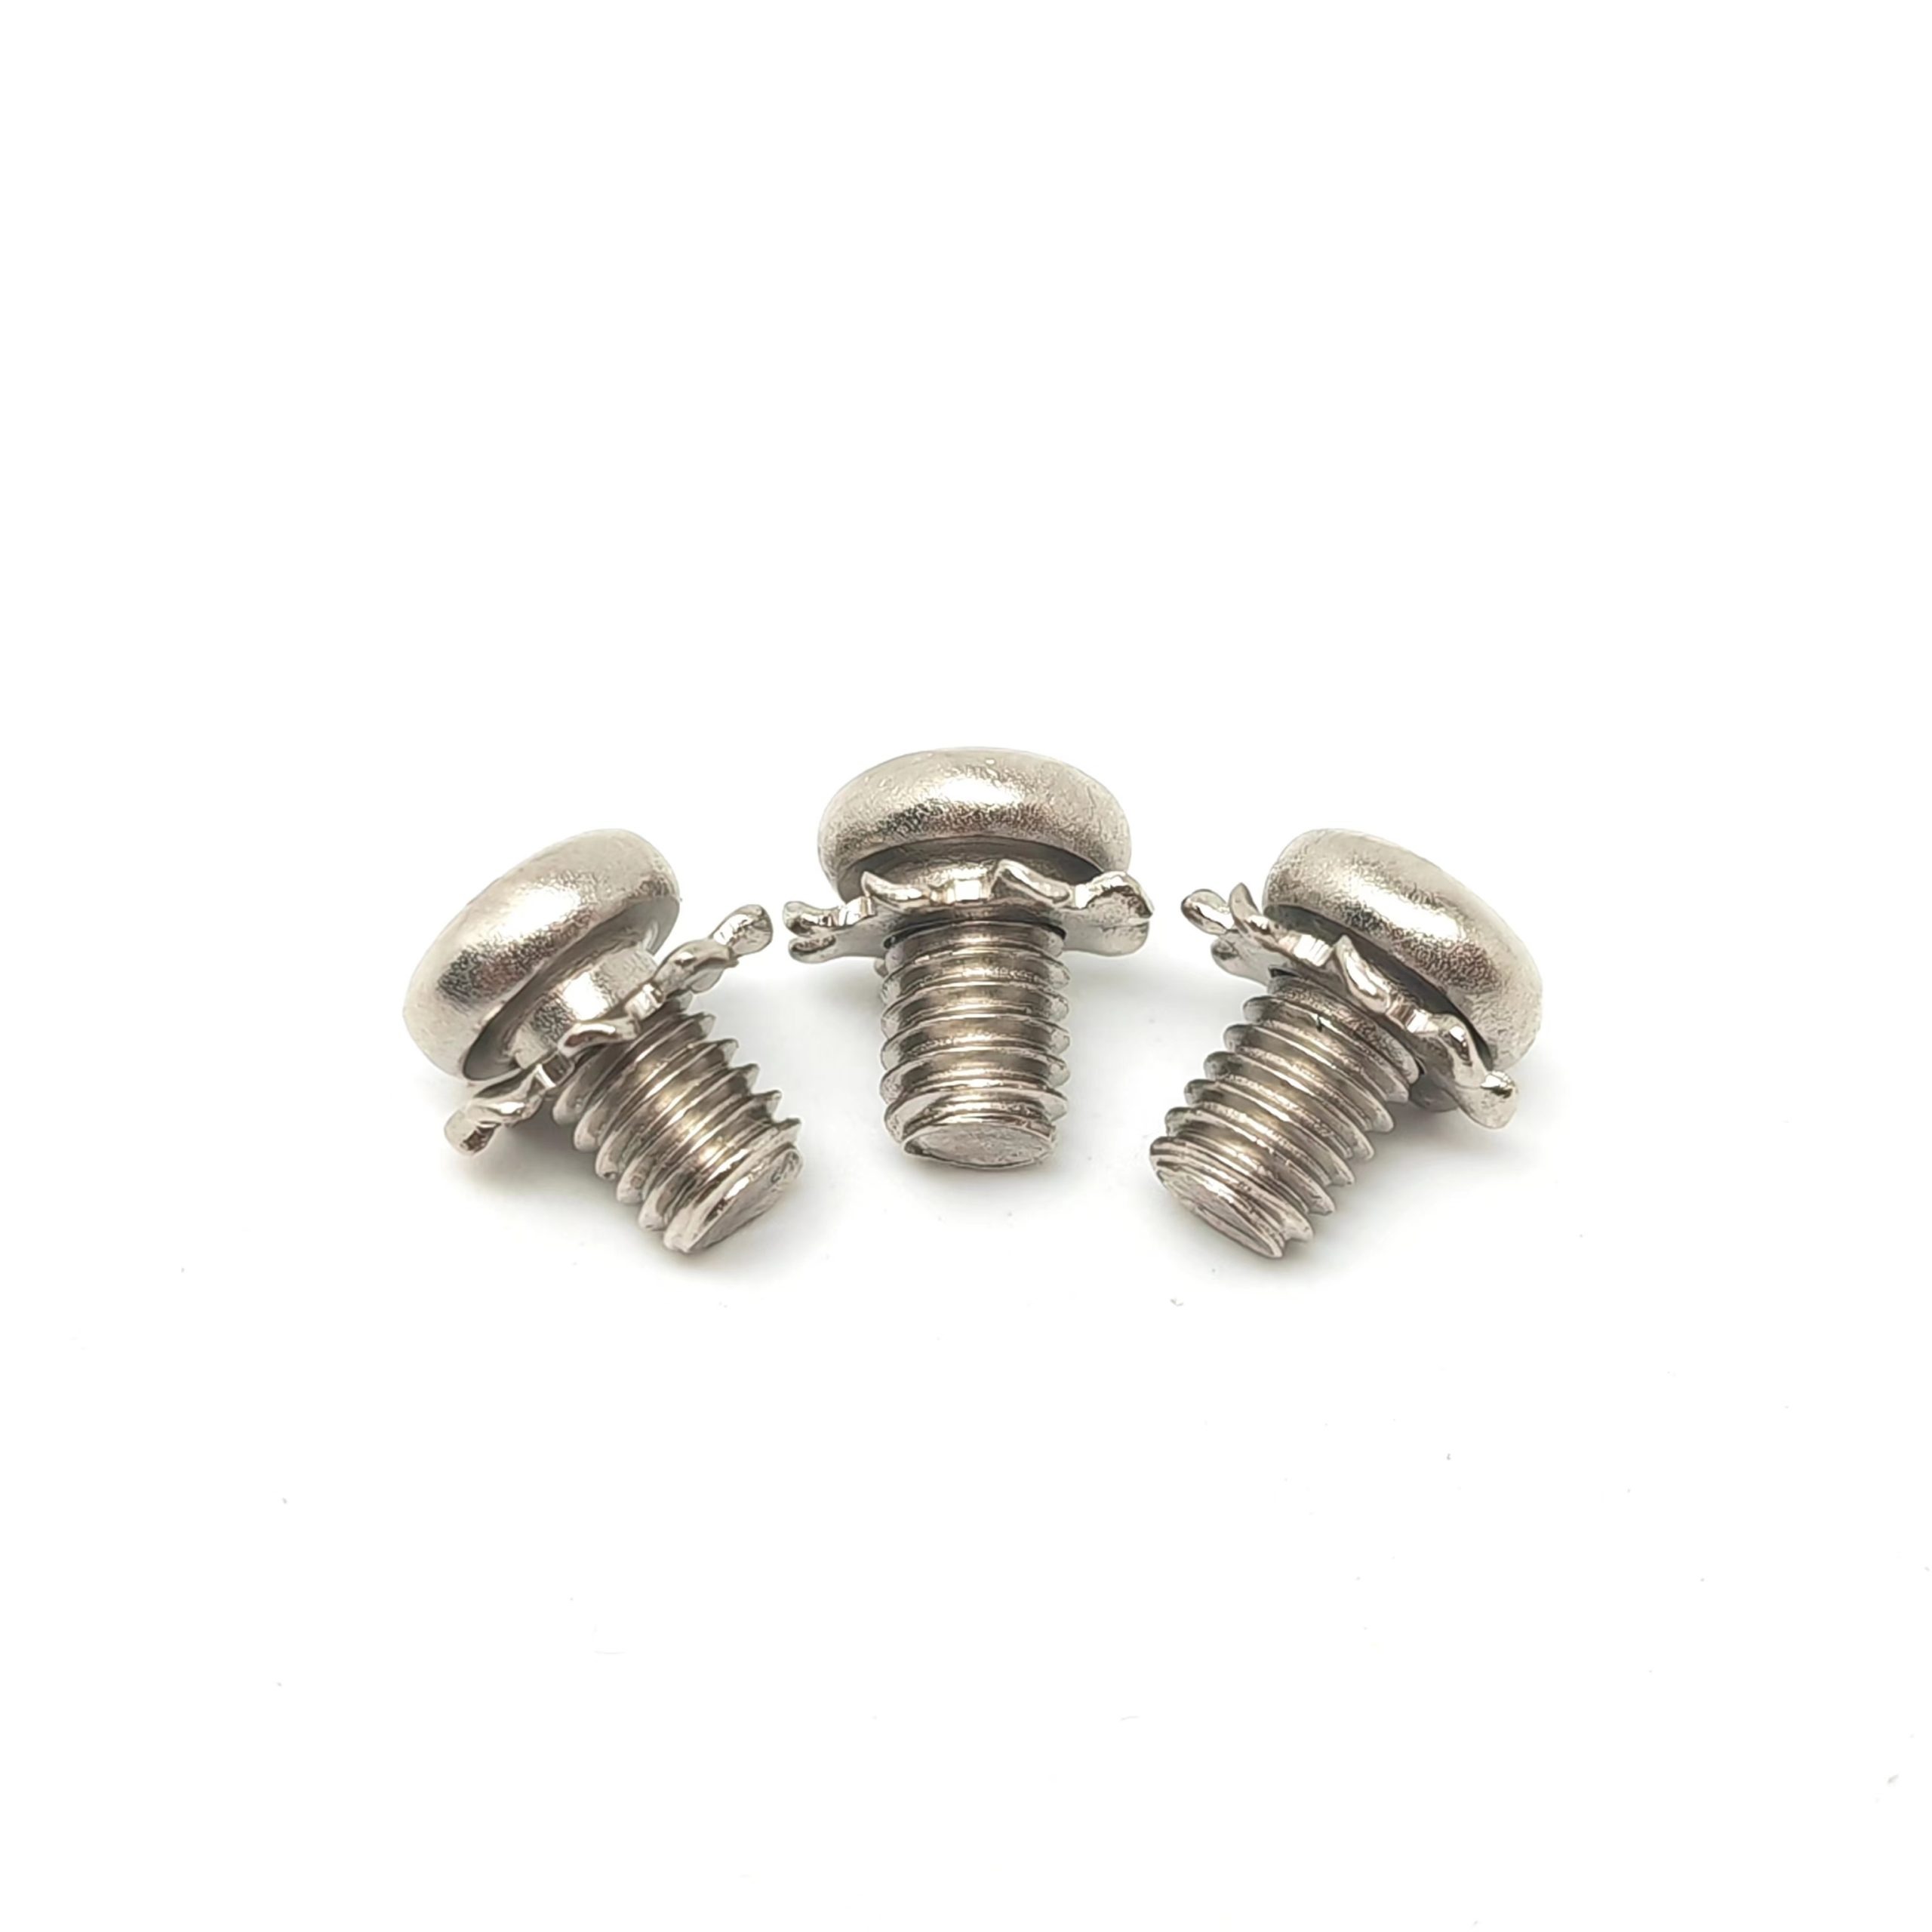 Pan Head Screw with Jagged Washer Manufacturer